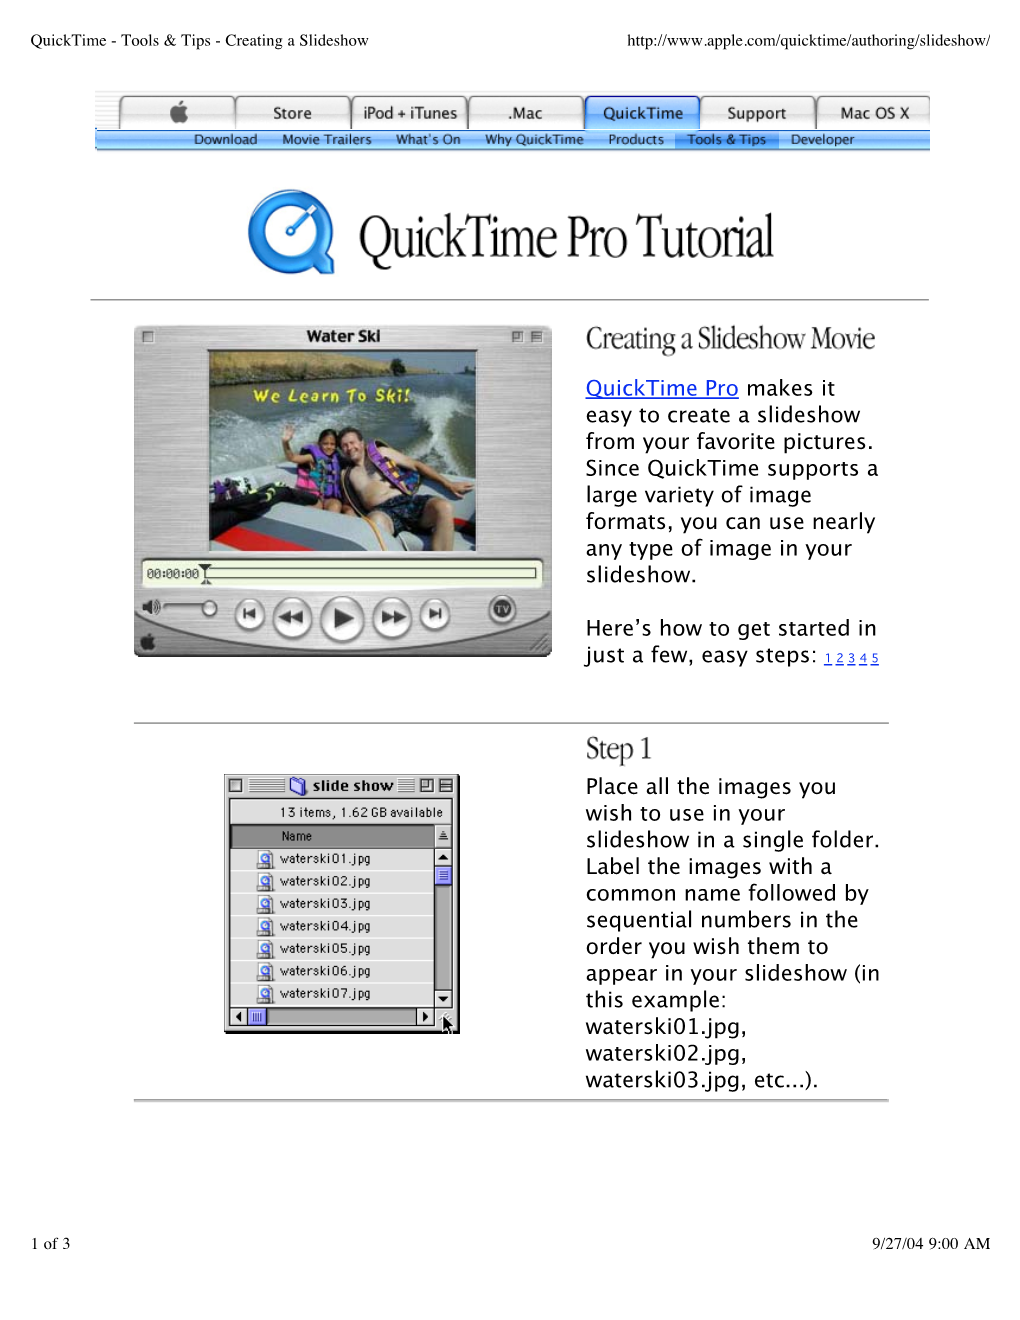 Quicktime Pro Makes It Easy to Create a Slideshow from Your Favorite Pictures